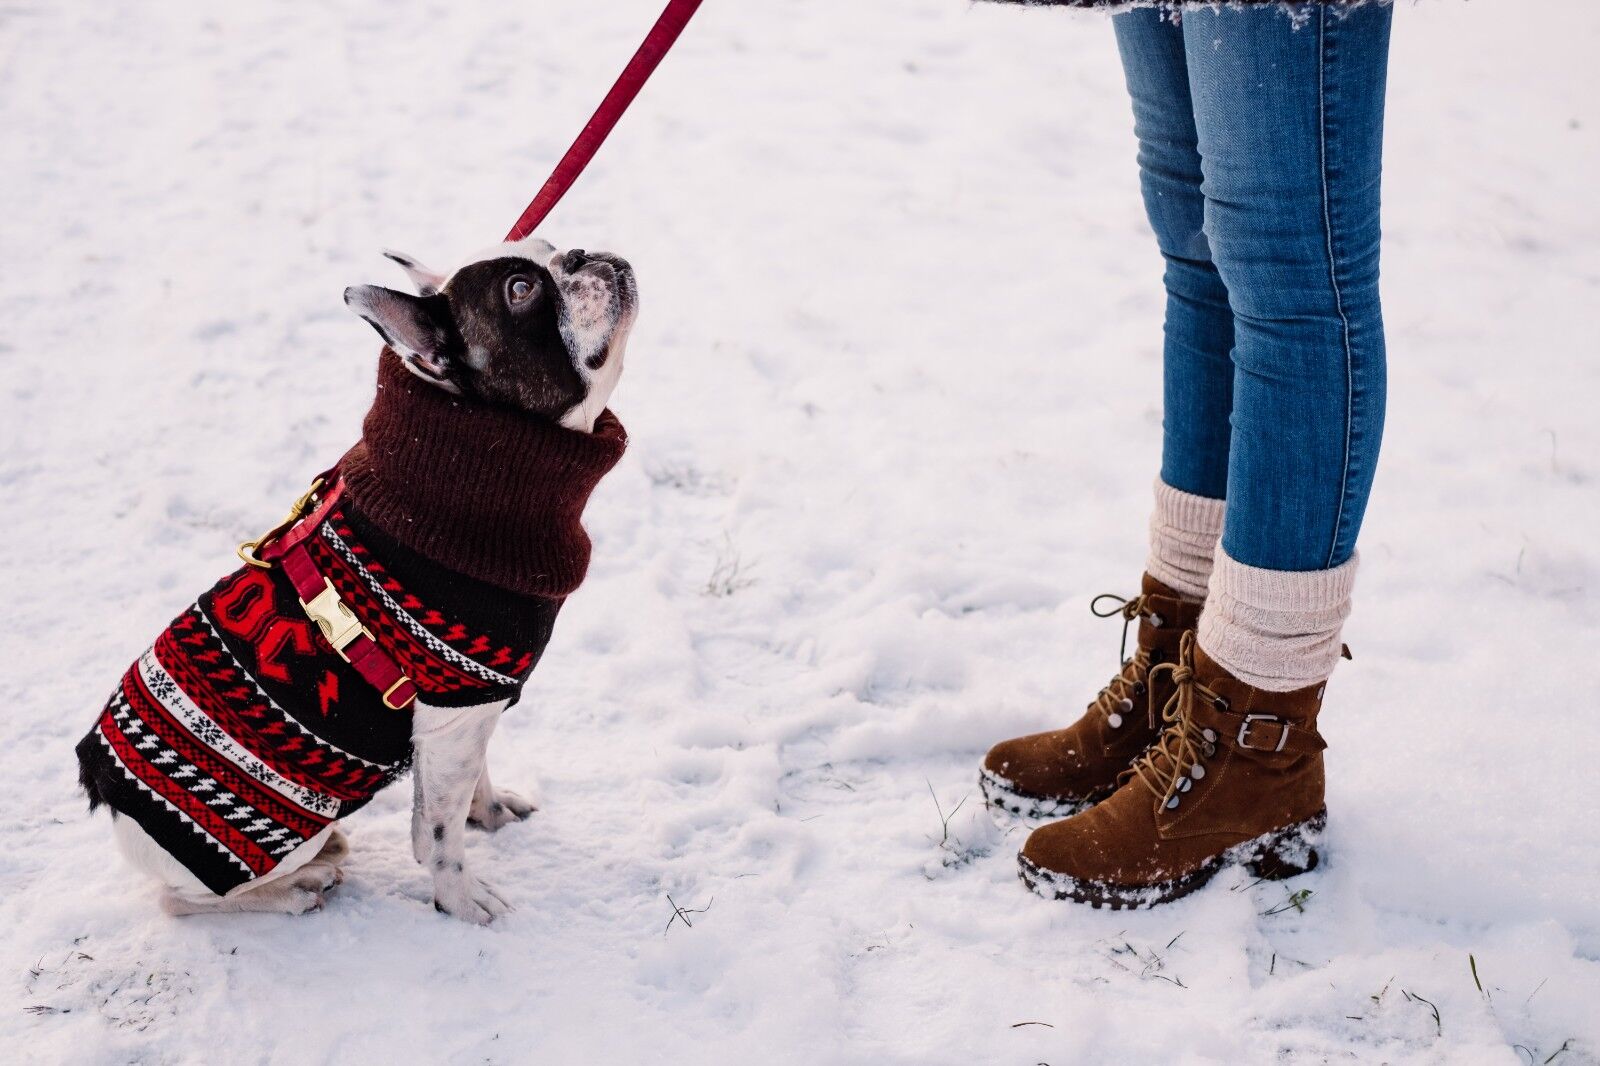 How cold is the weather when dogs need to wear clothes?